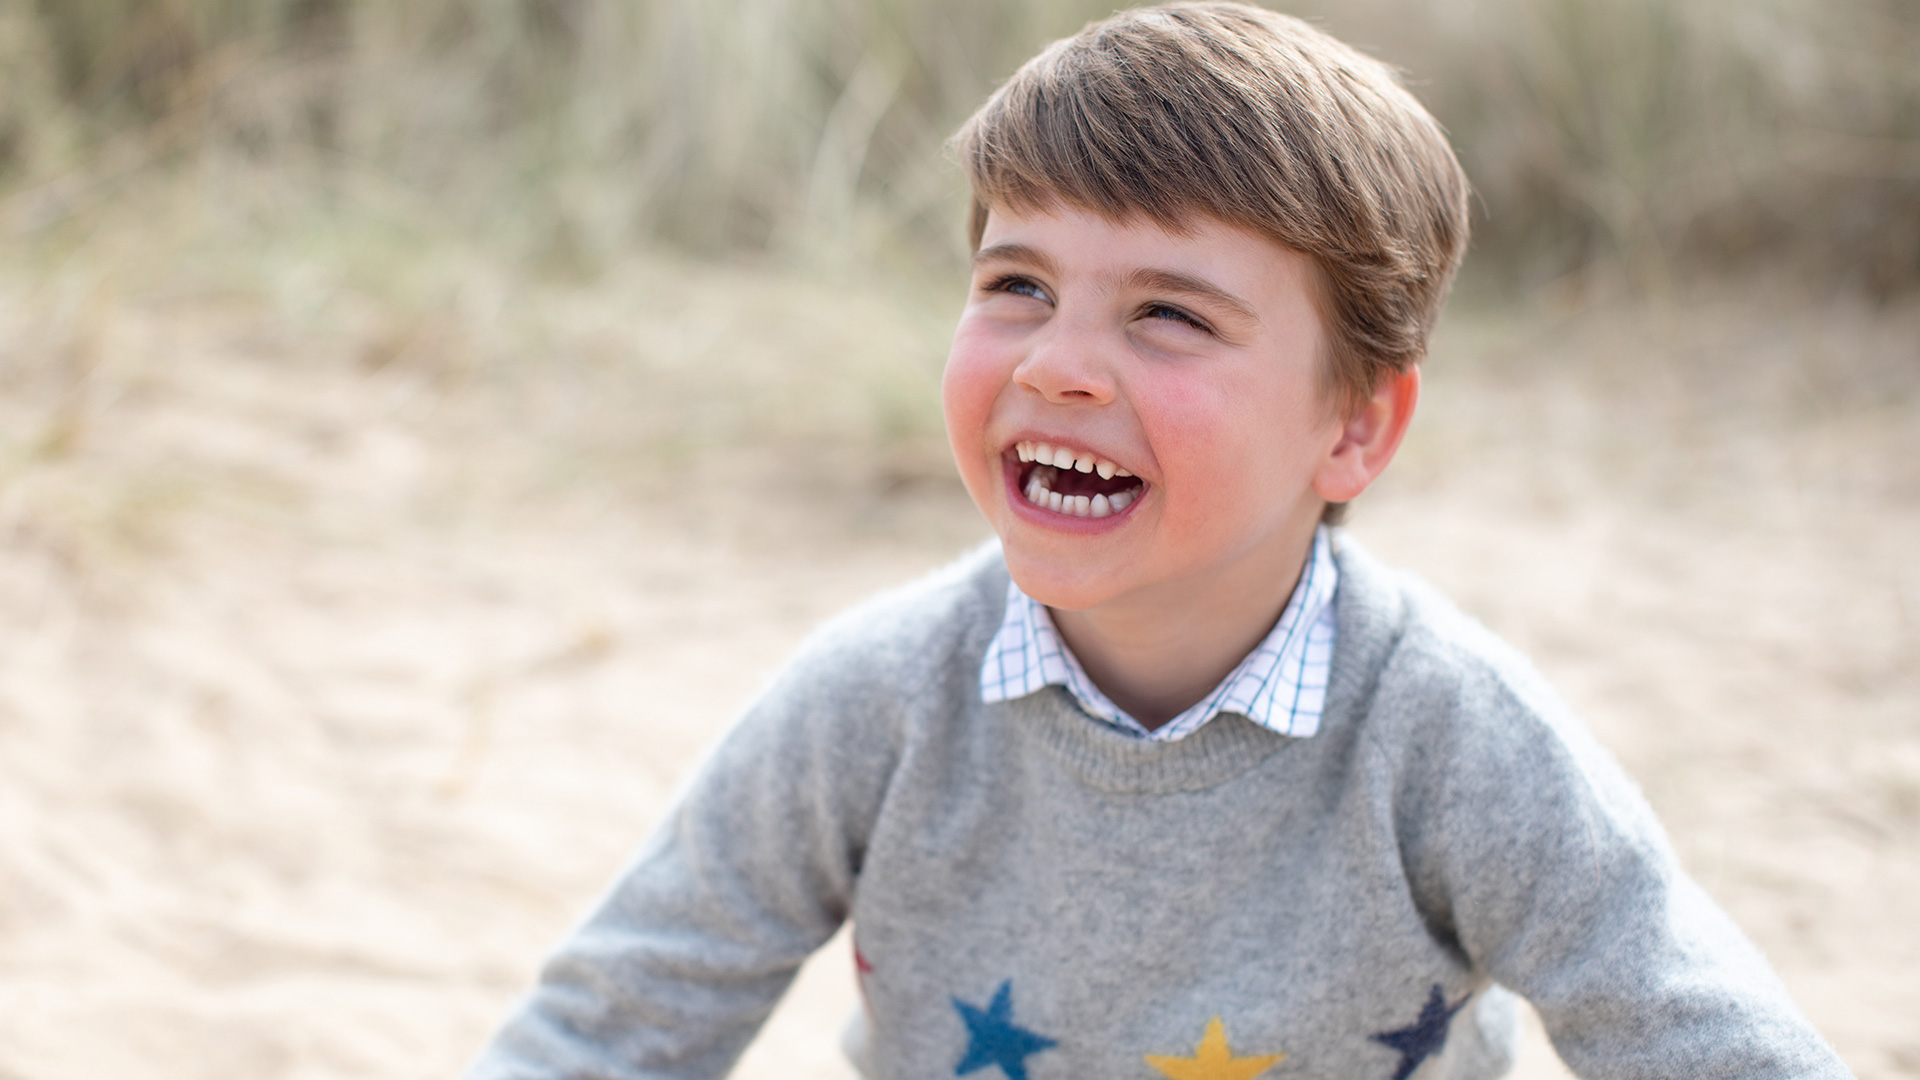 Prince Louis beams as he plays on the beach in cute photos for fourth birthday